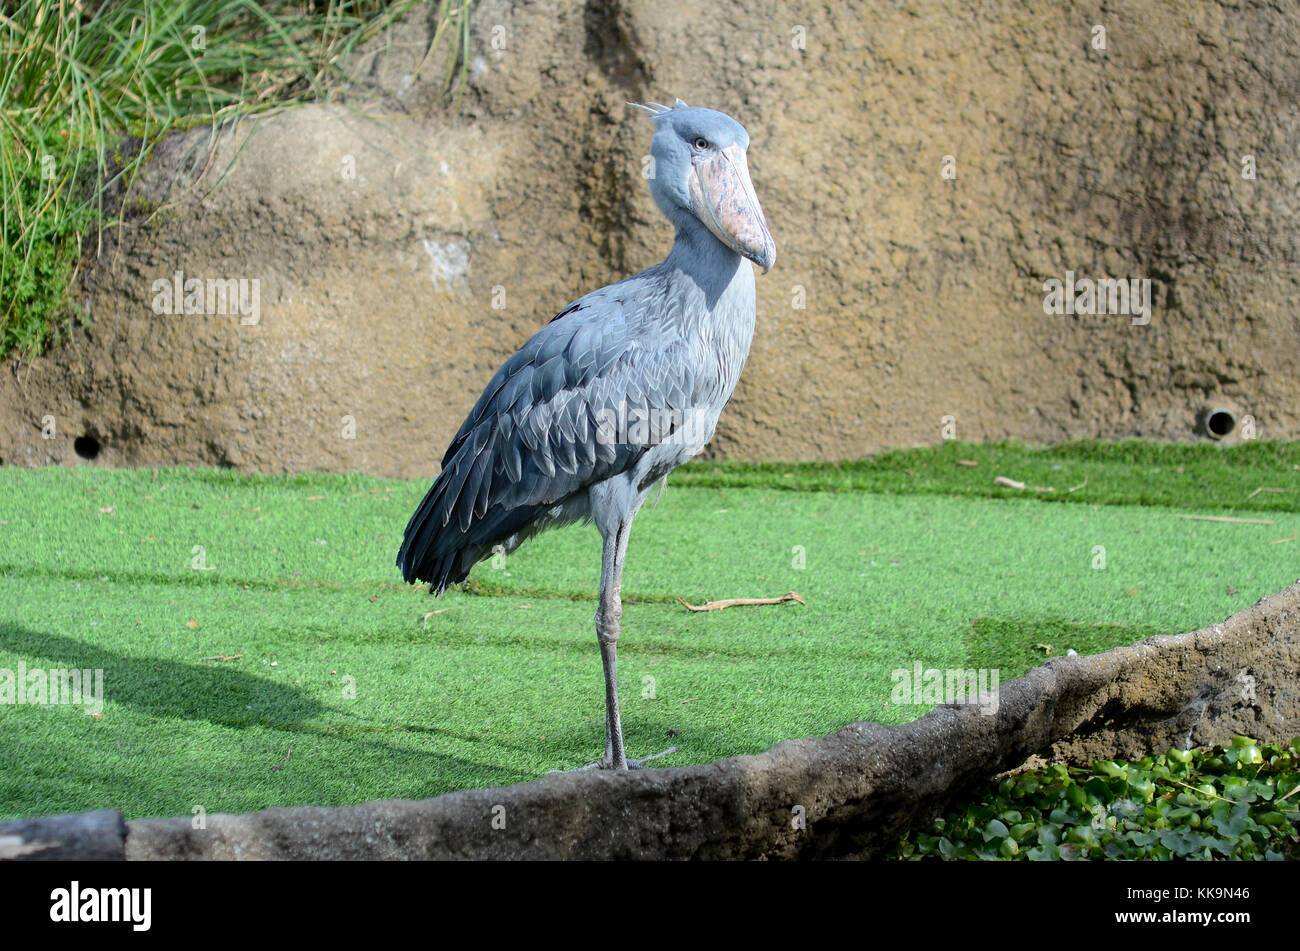 A shoebill bird, also known as a whalehead or shoe-billed stork, at Animal Kingdom in Kobe, Japan. Stock Photo